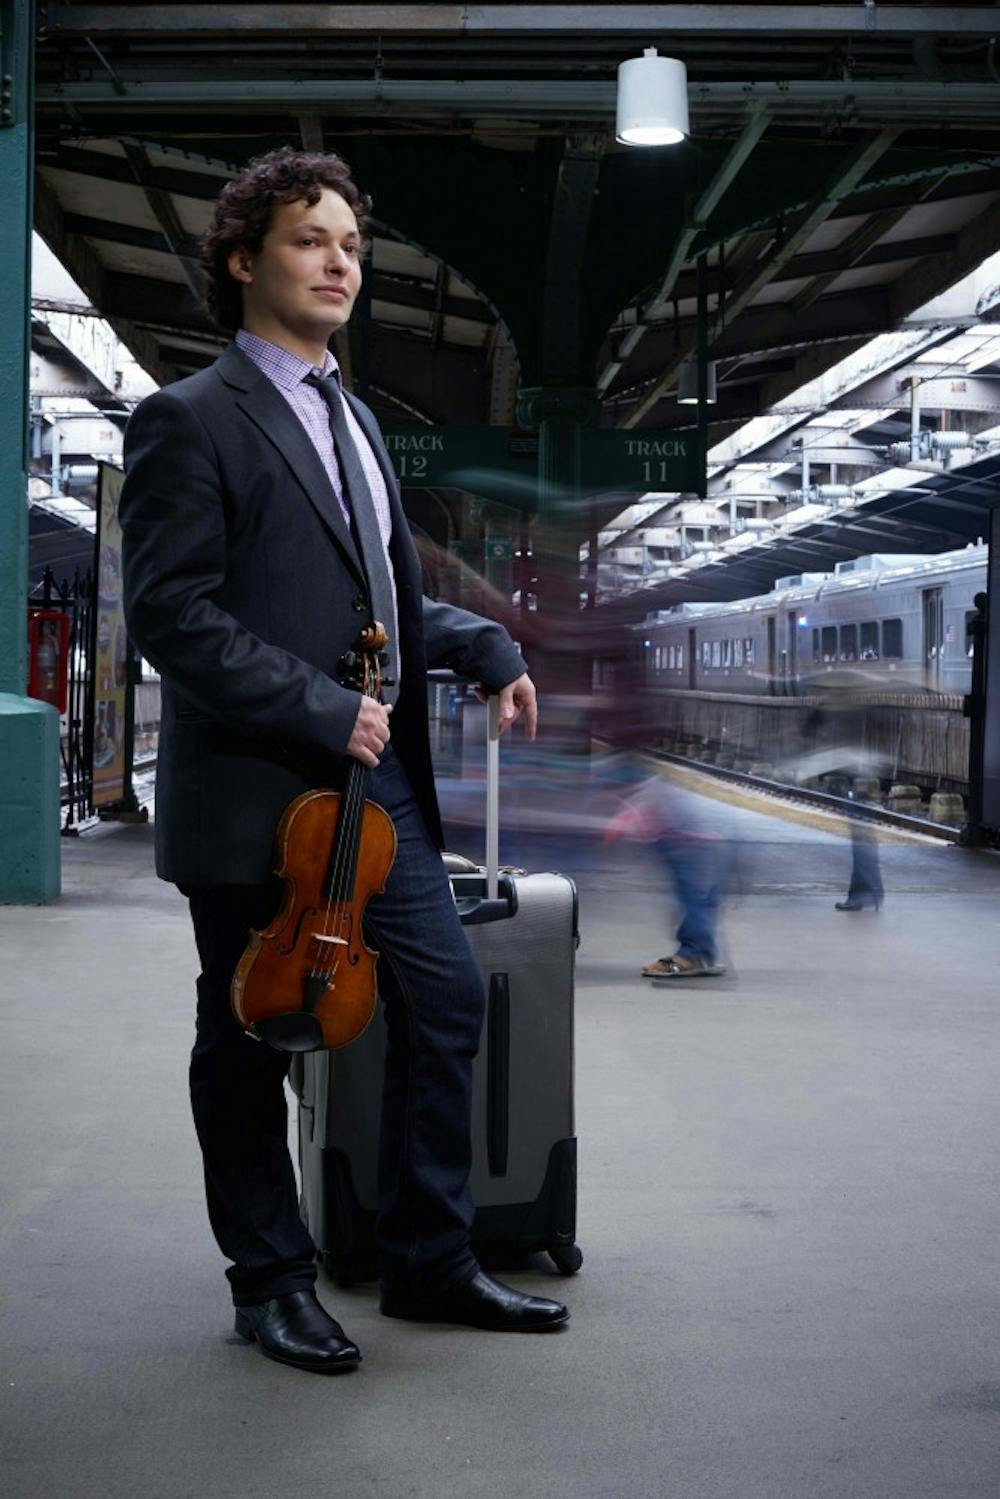 <p>Violinist Yevgeny Kutik teamed up with pianist Spencer Myer the the latest concert of the Tuesday Evening Series.</p>